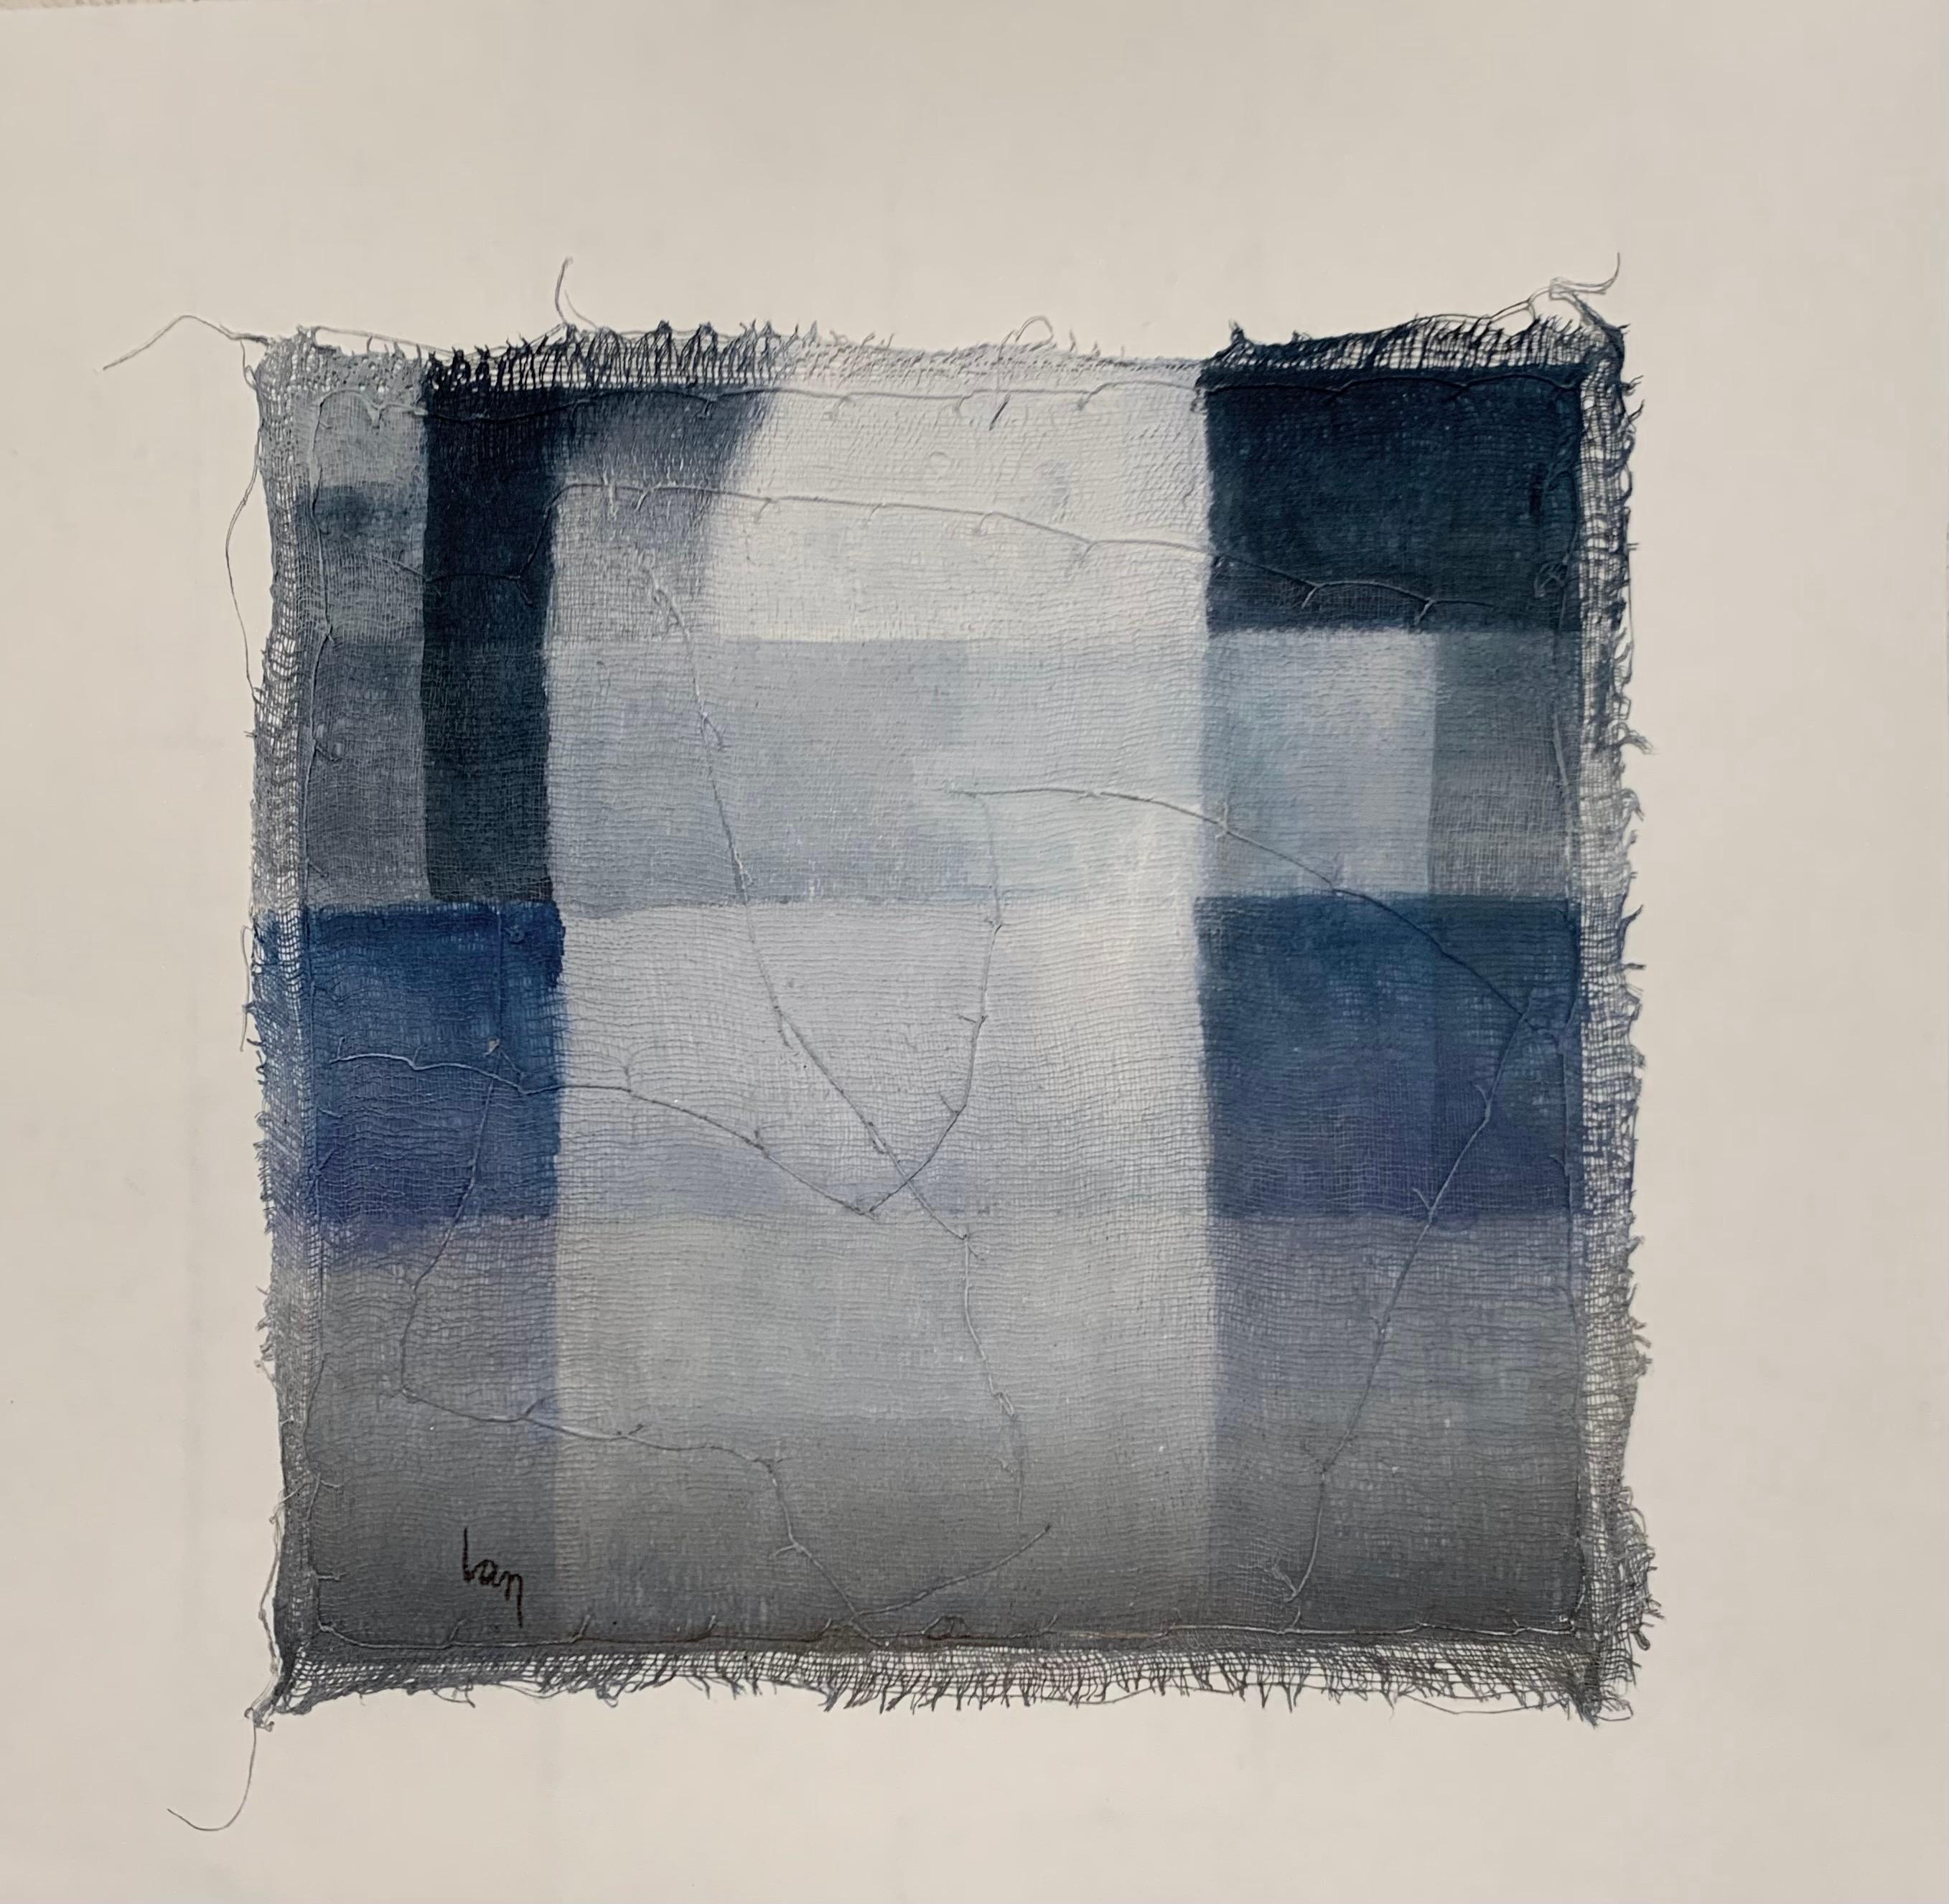 Contemporary Belgian artist Diane Petry creates her own three layer canvas using pima cotton, gauze and fine paper.
Colors are shades of blue checkerboard design.
Raw edges and applied threads add texture and dimension to the acrylic